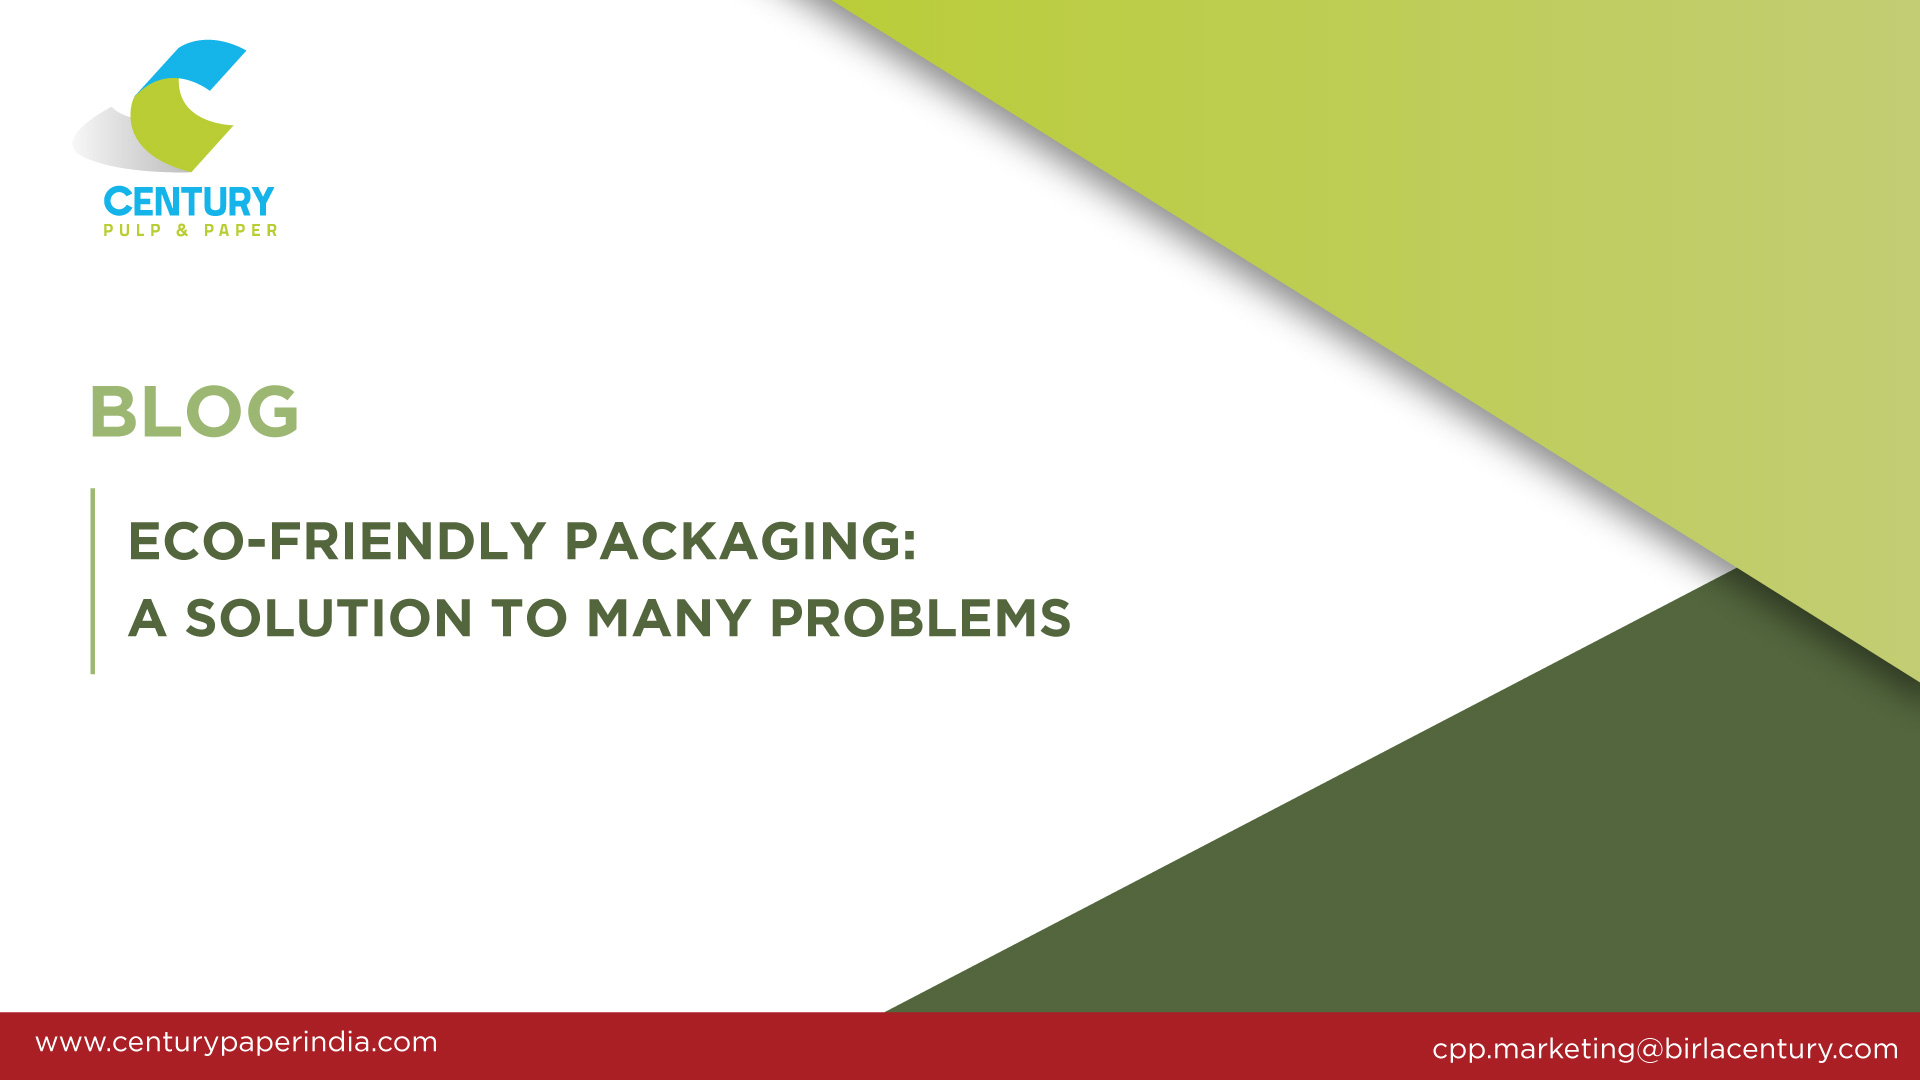 Eco-friendly packaging: a solution to many problems